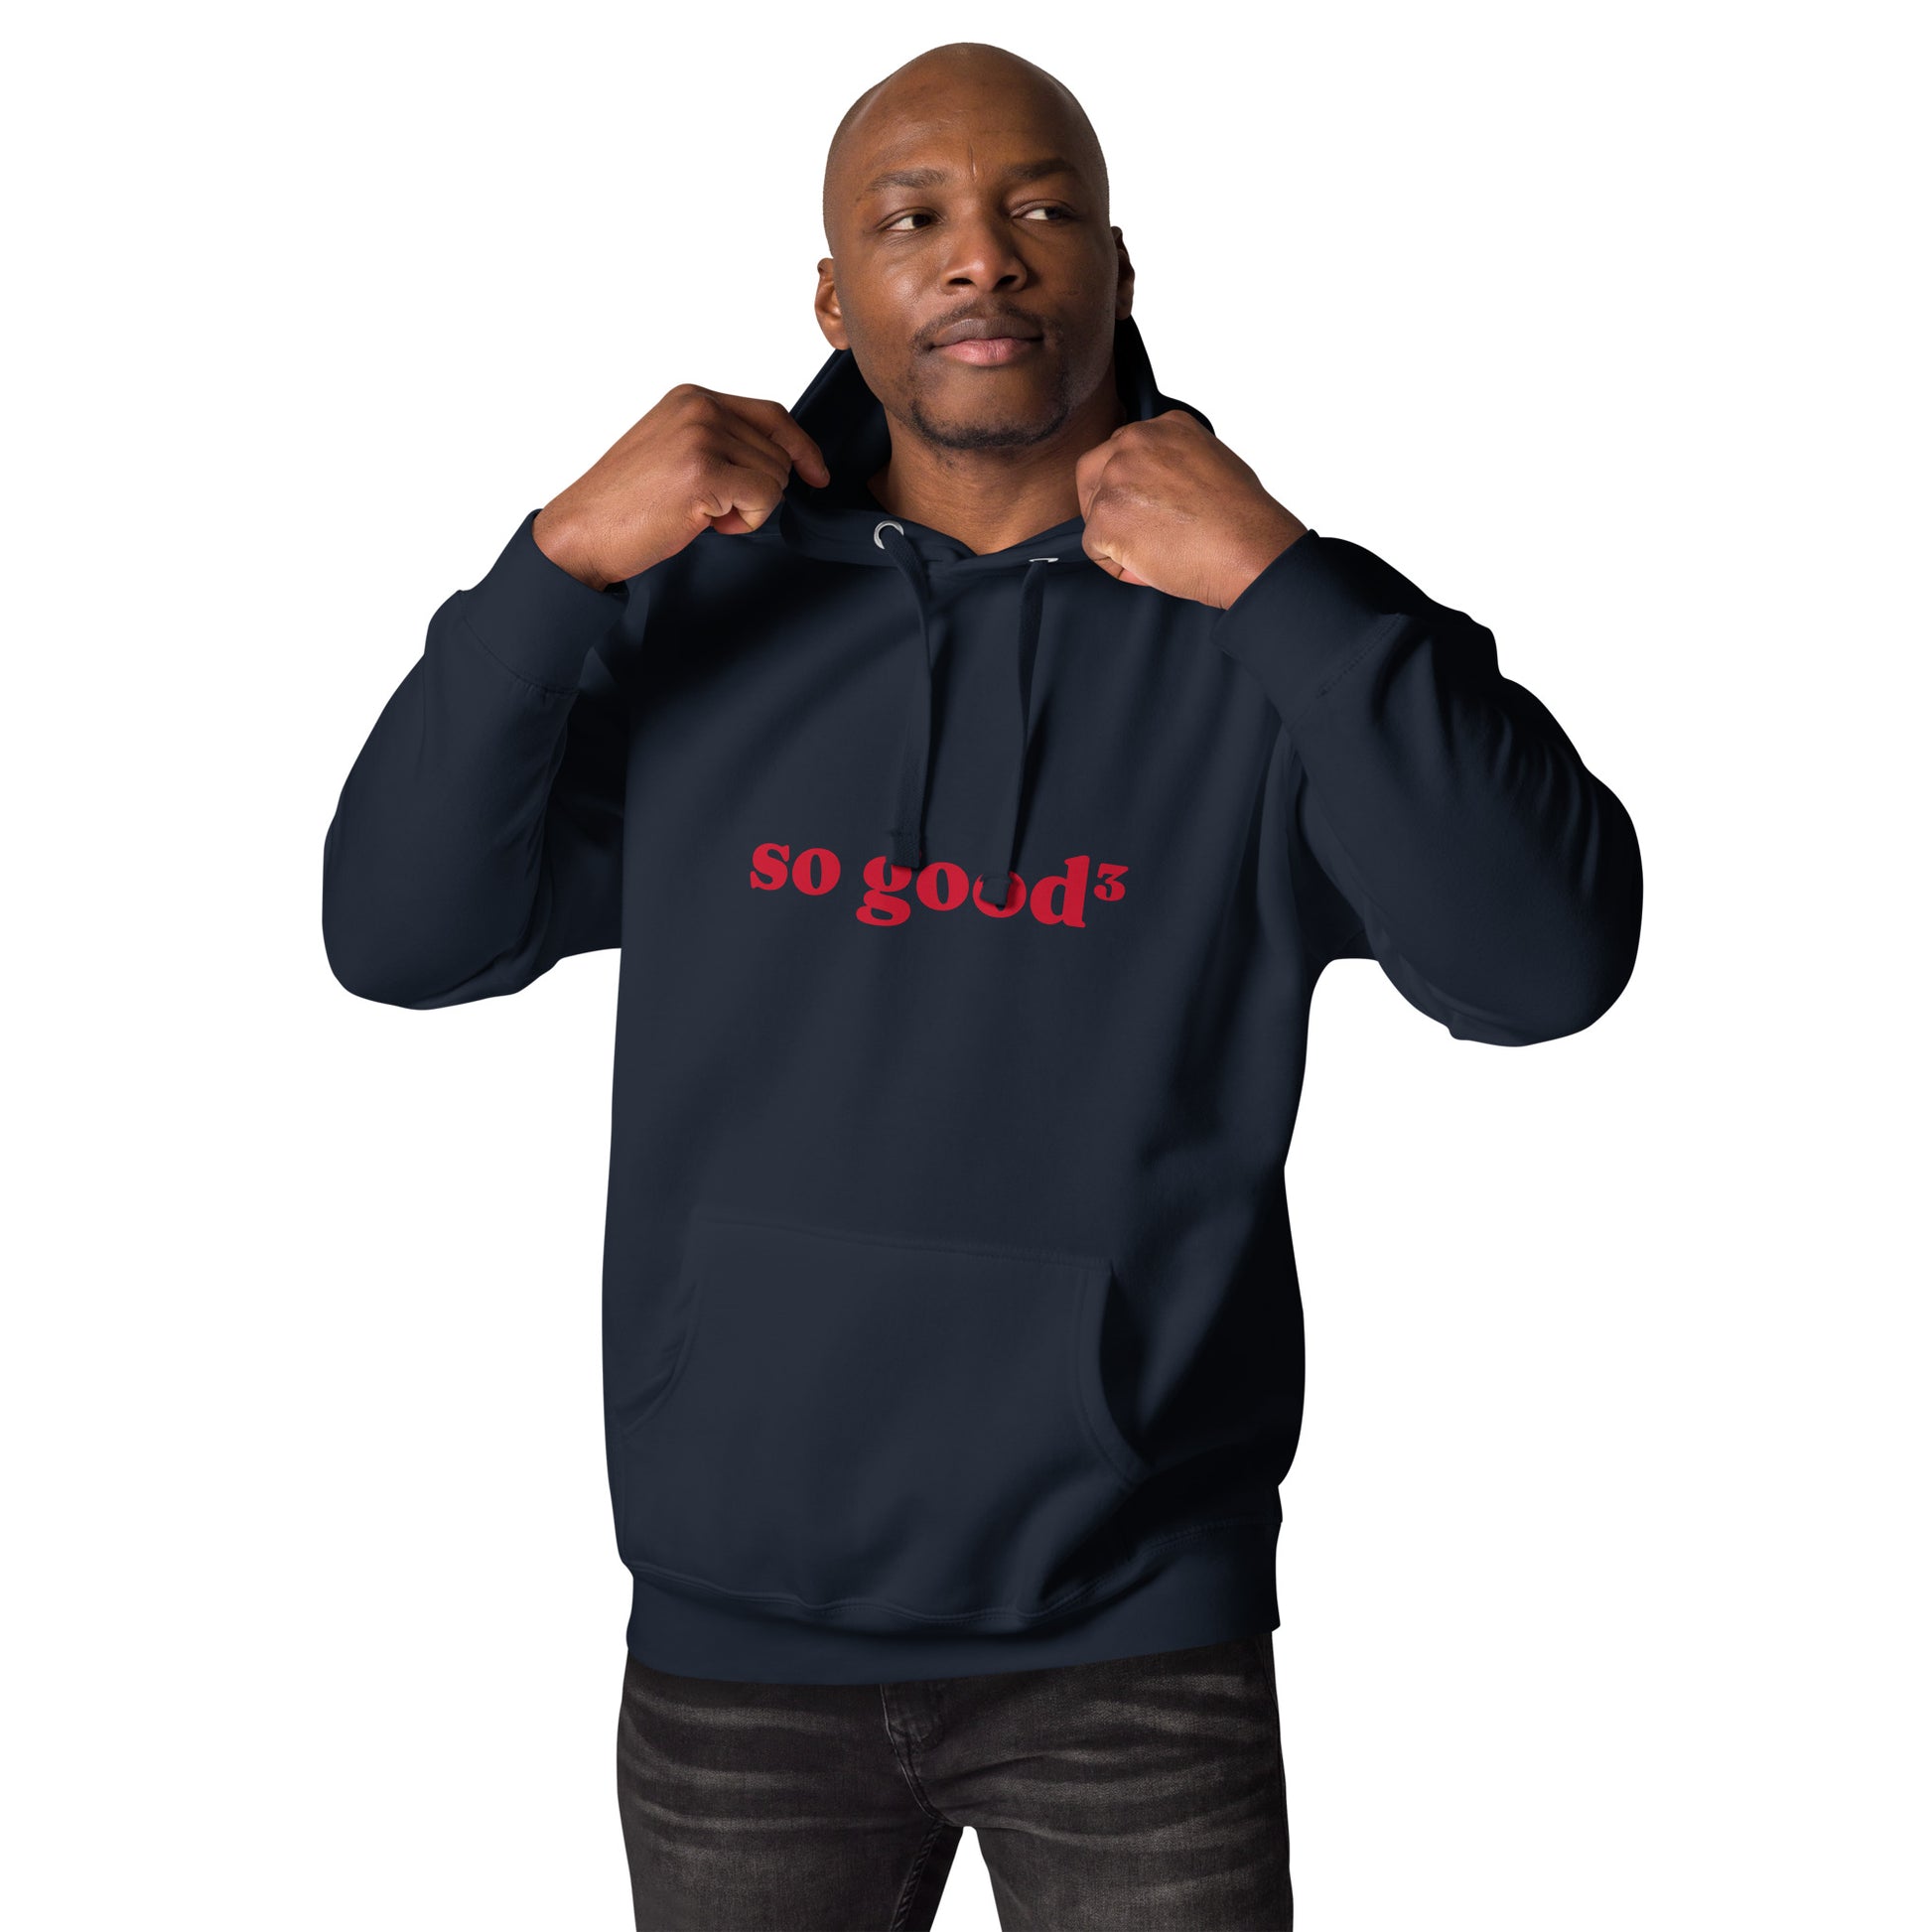 man wearing navy blue hoodie that says "so good cubed" in red lettering